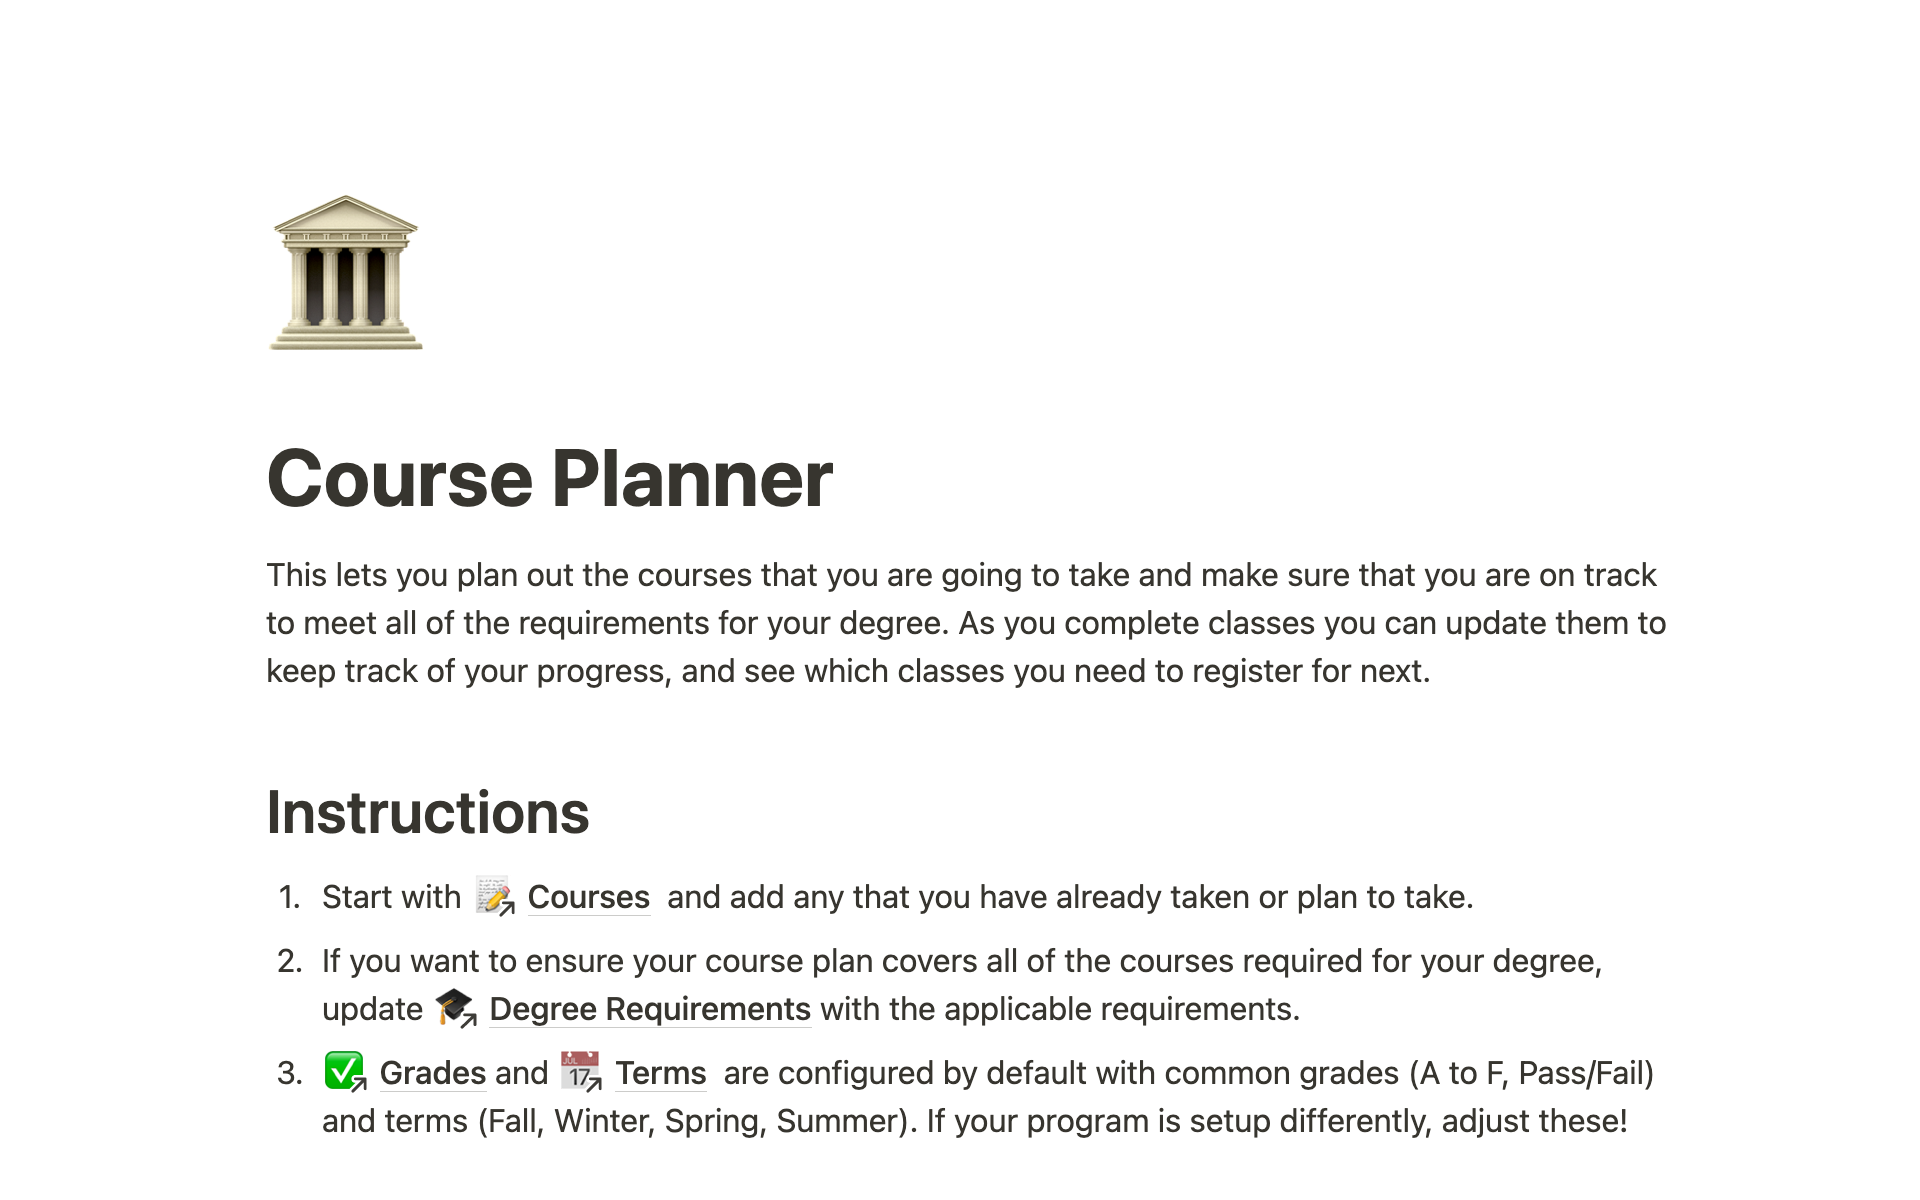 Helps plan out university courses and track progress towards a degree.